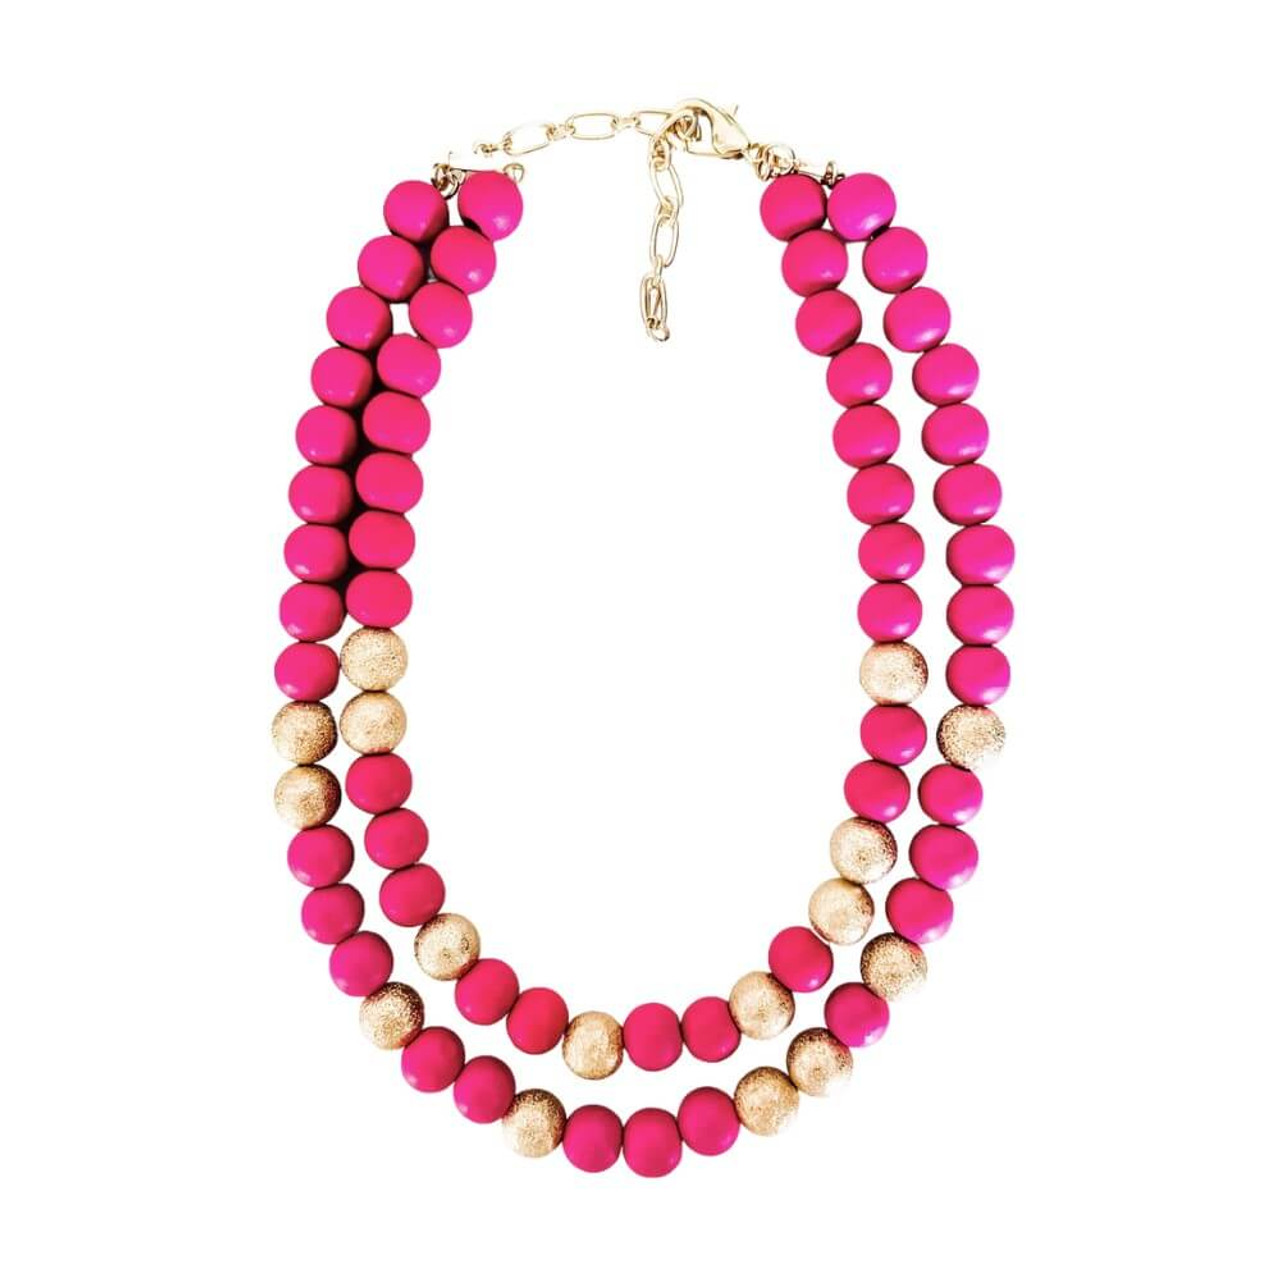 Hot Pink Fuchsia Magenta Coin Pearl Chunky Necklace Natural Statement  Jewelry | eBay